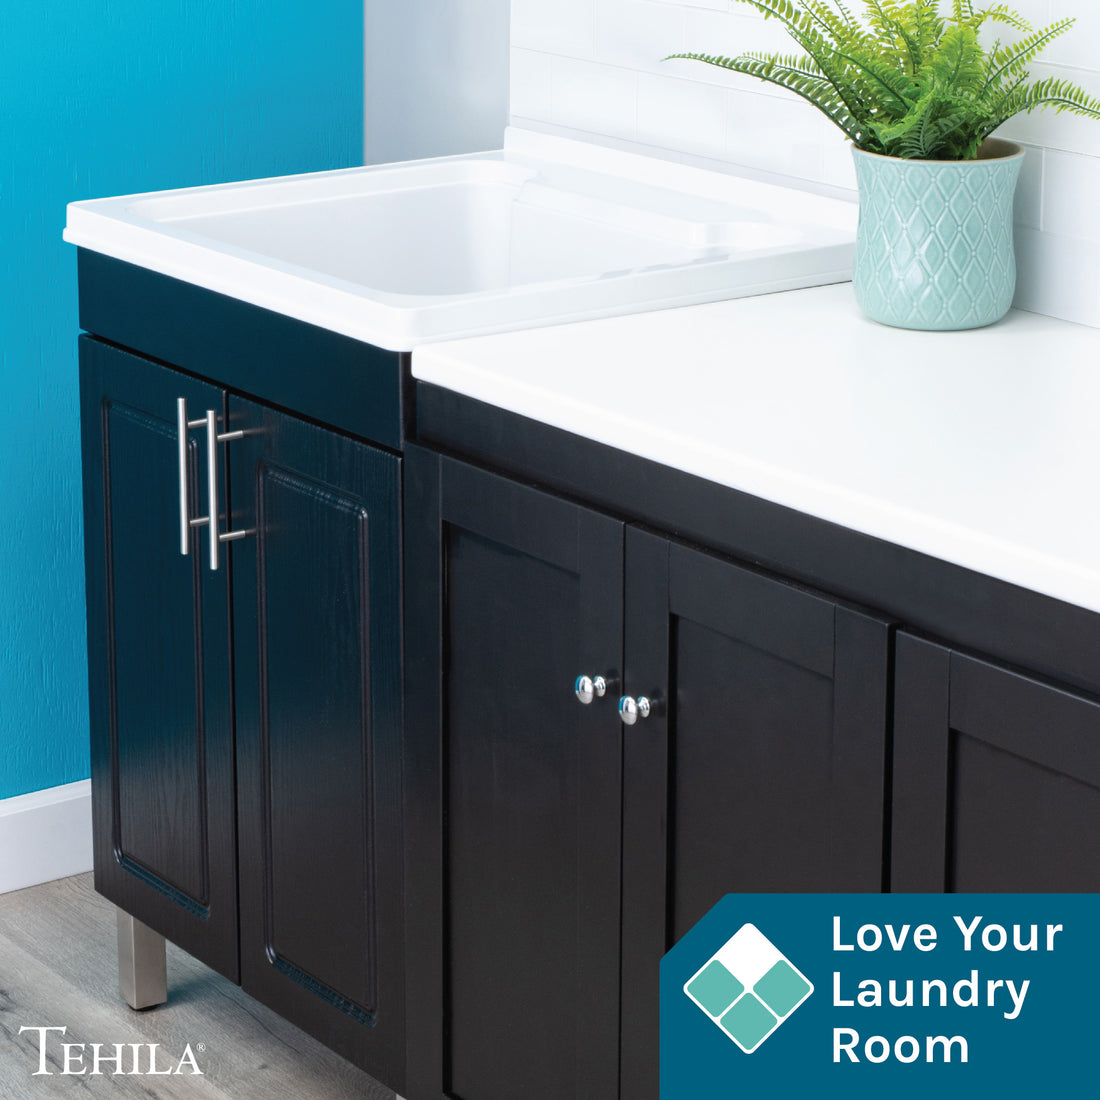 Utility Sink Love Your Laundry Room